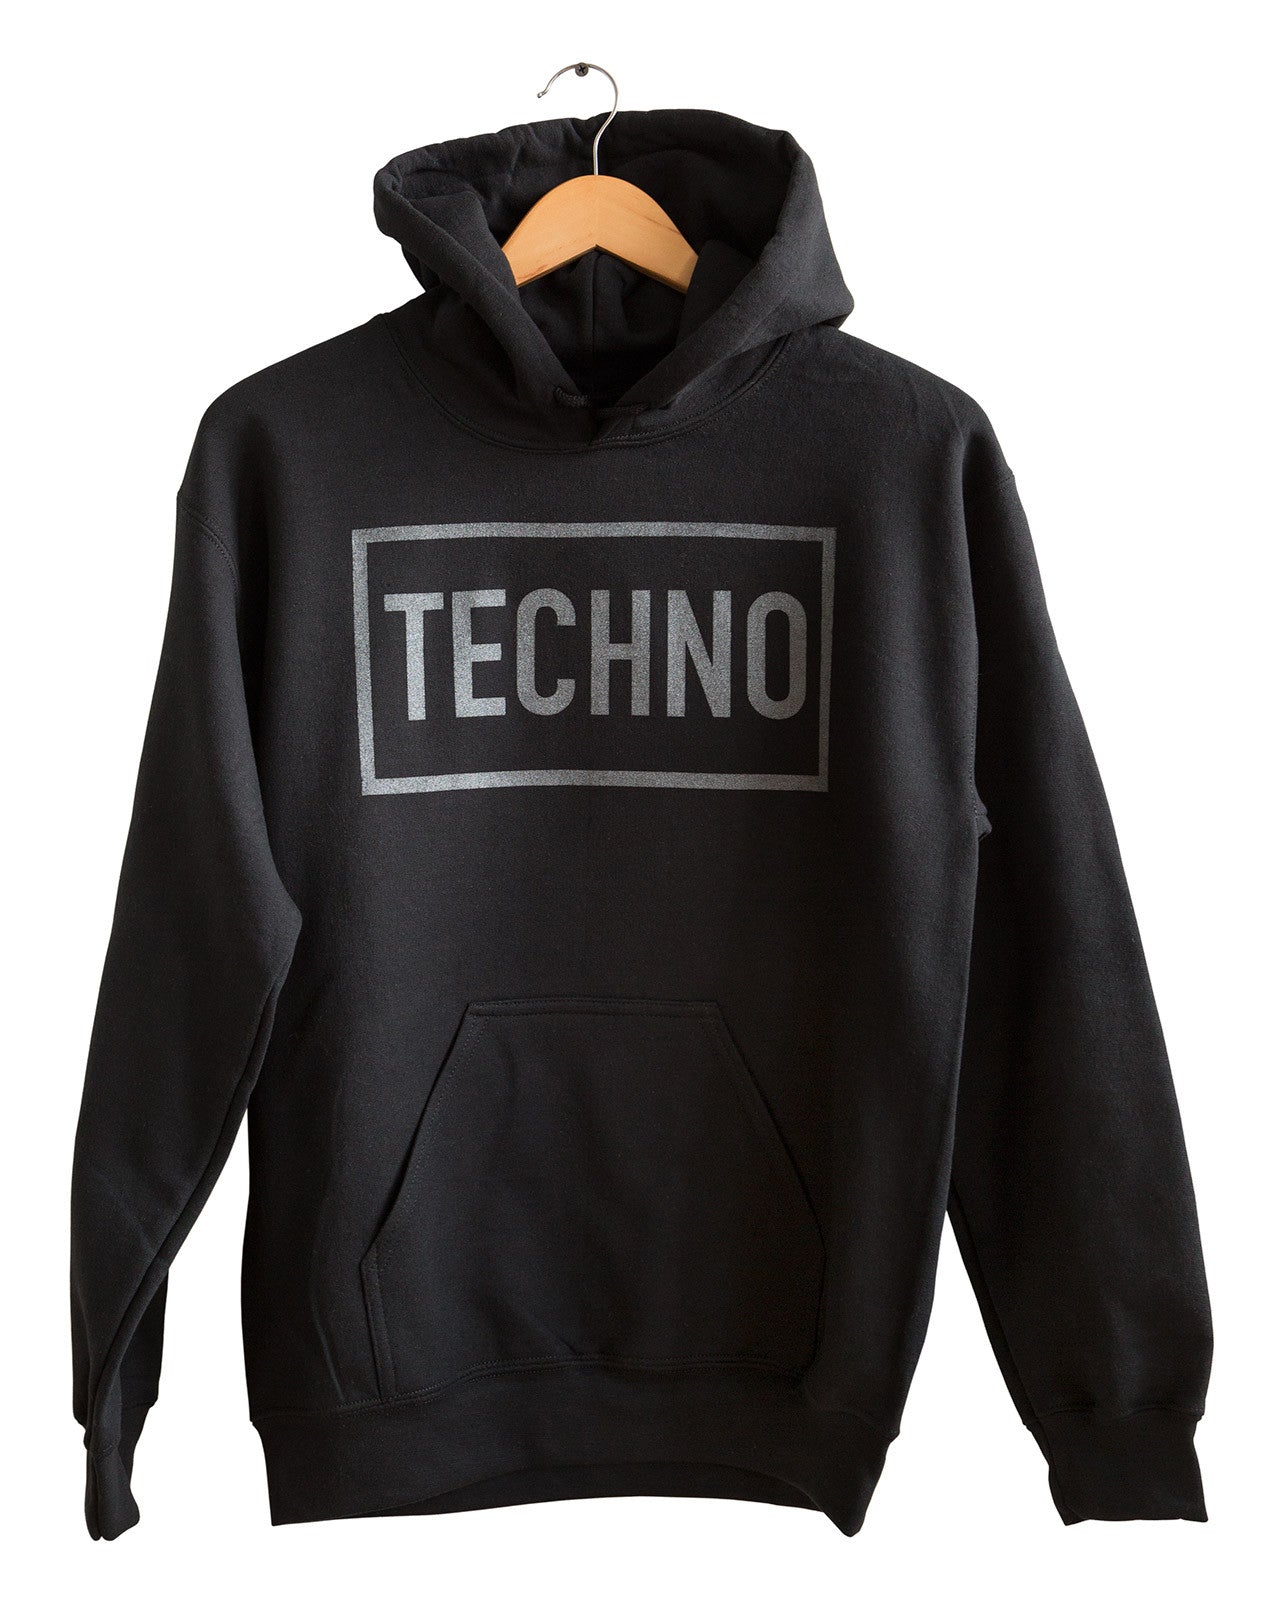 Techno Print Pullover Hoodie, Well Done Goods – Well Done Goods, by Cyberoptix